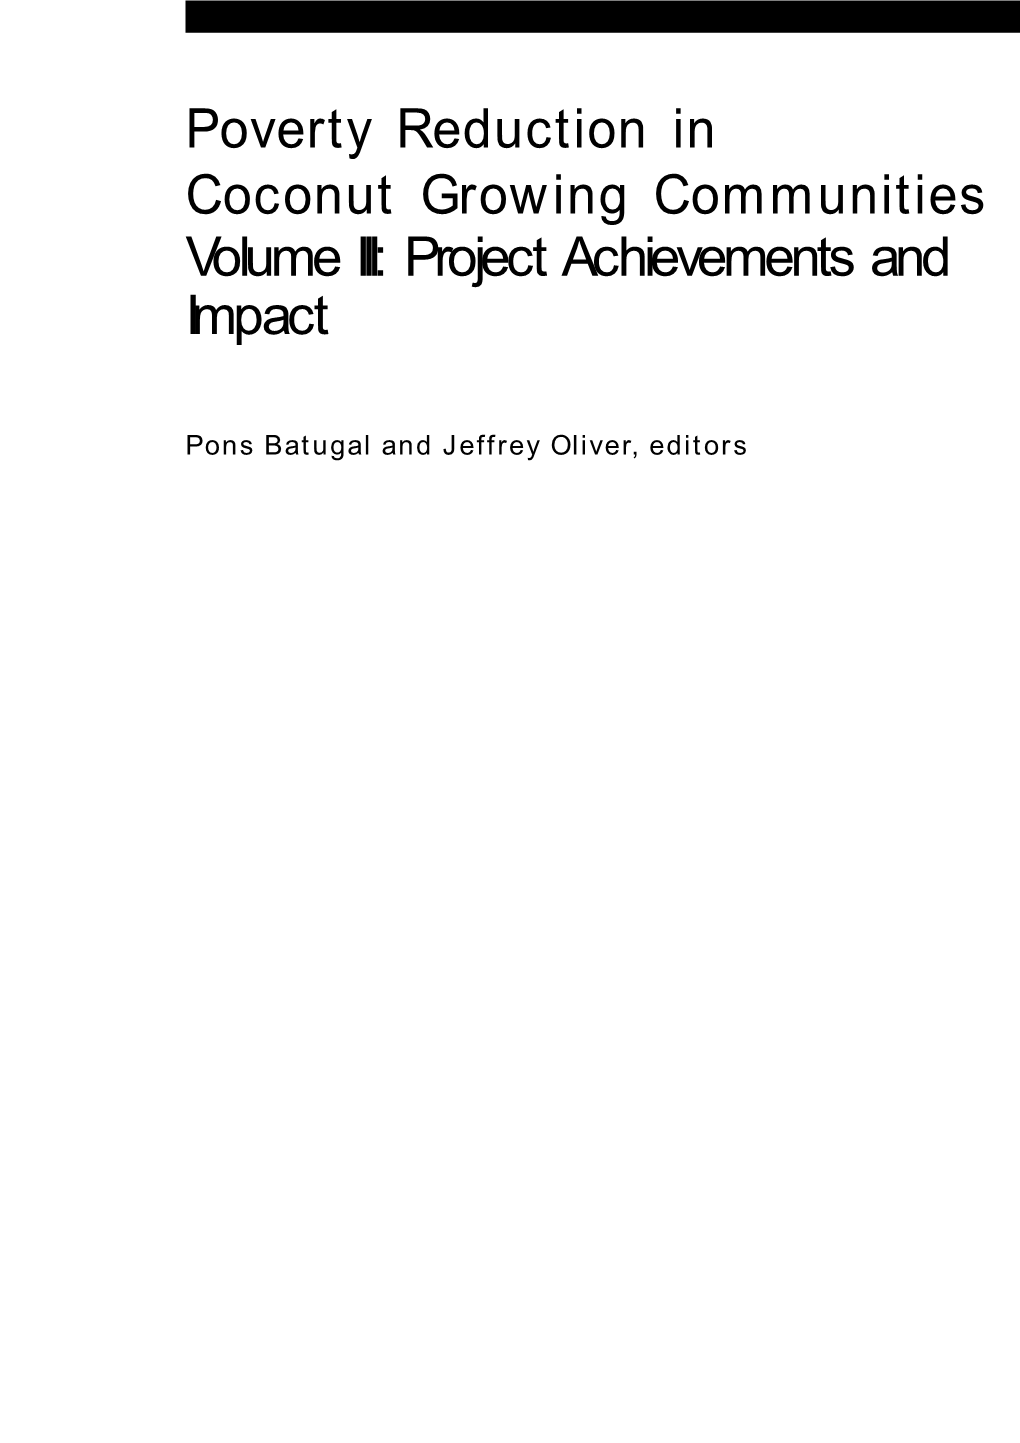 Poverty Reduction in Coconut Growing Communities Volume III: Project Achievements and Impact